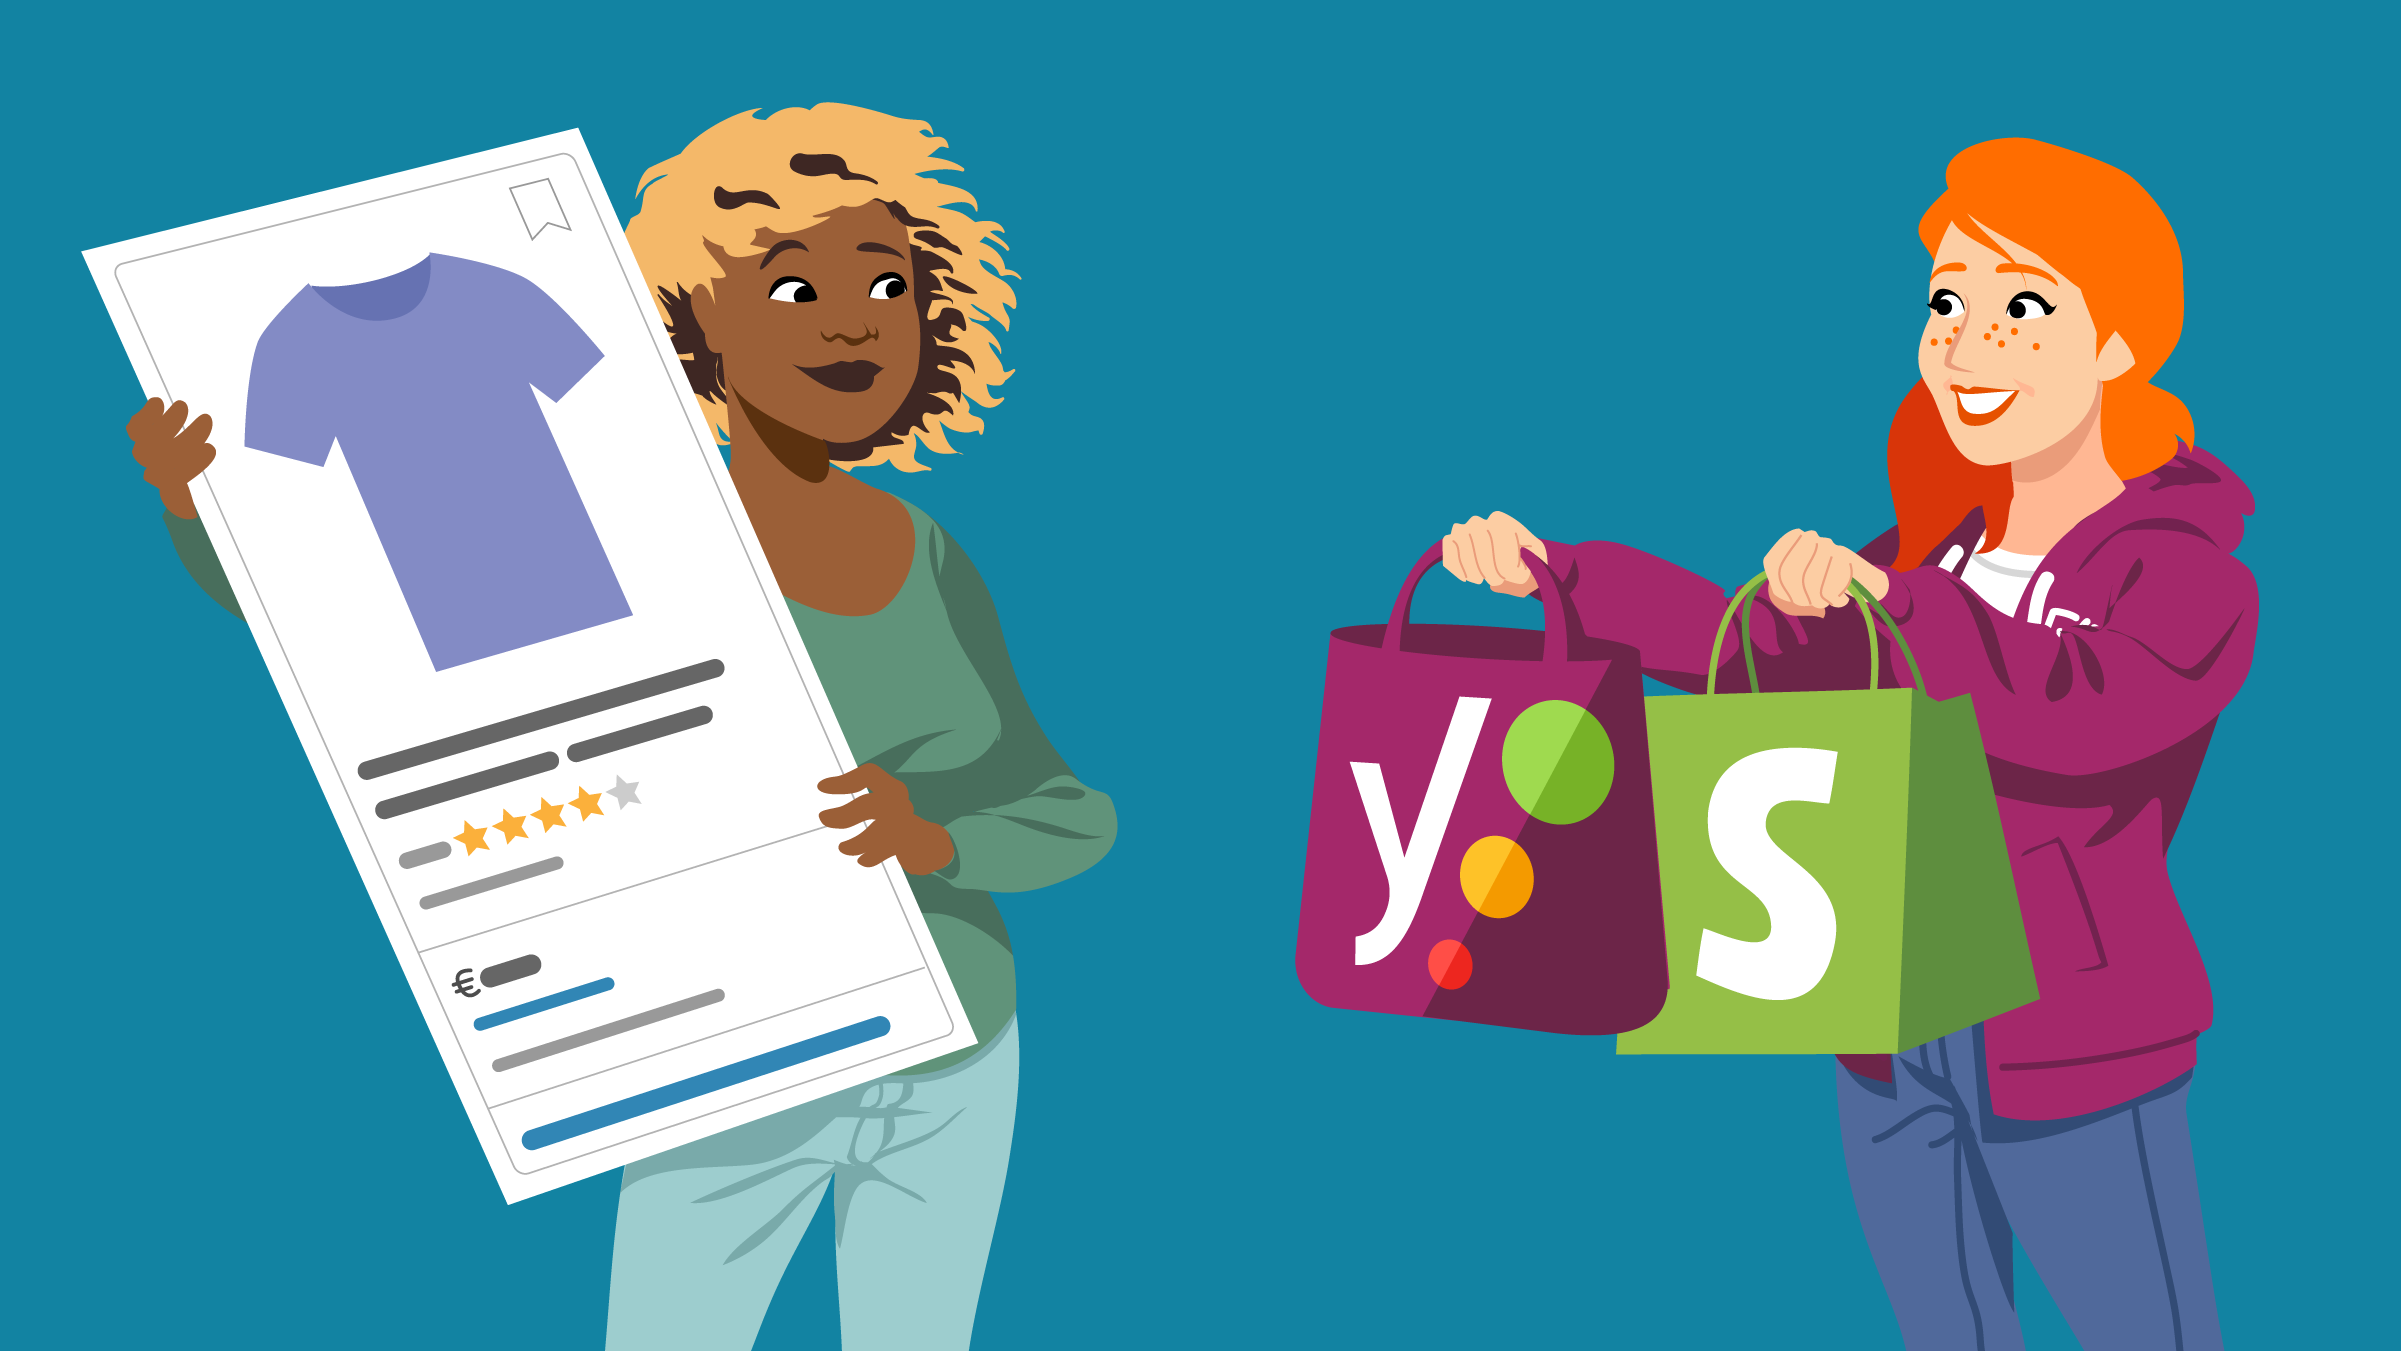 We have big news: Yoast SEO is coming to Shopify! • Yoast